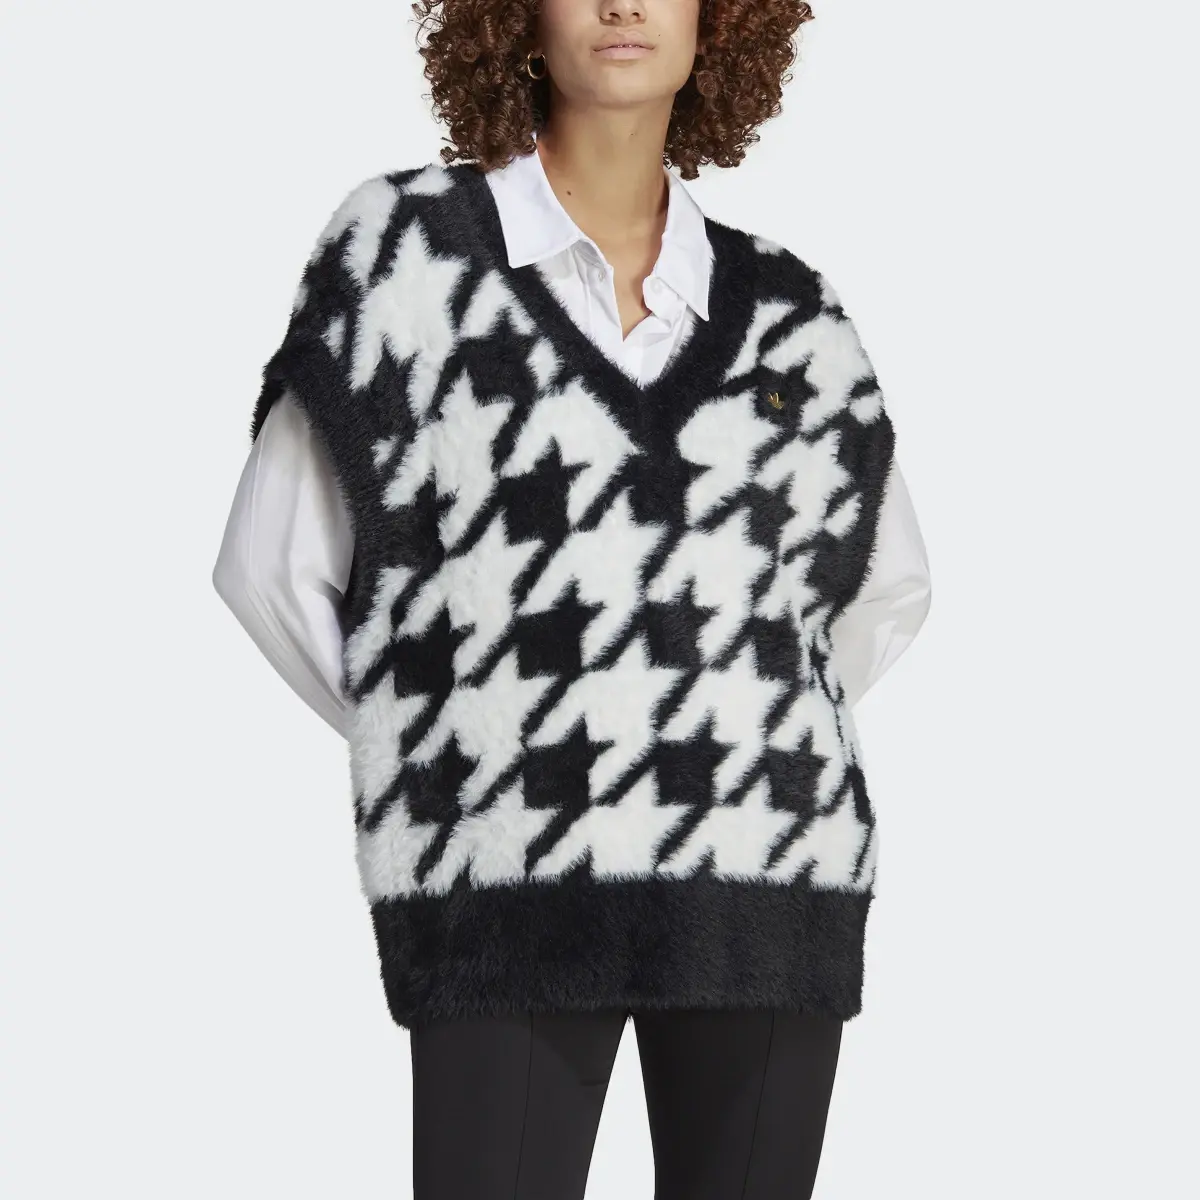 Adidas Chaleco Houndstooth. 1